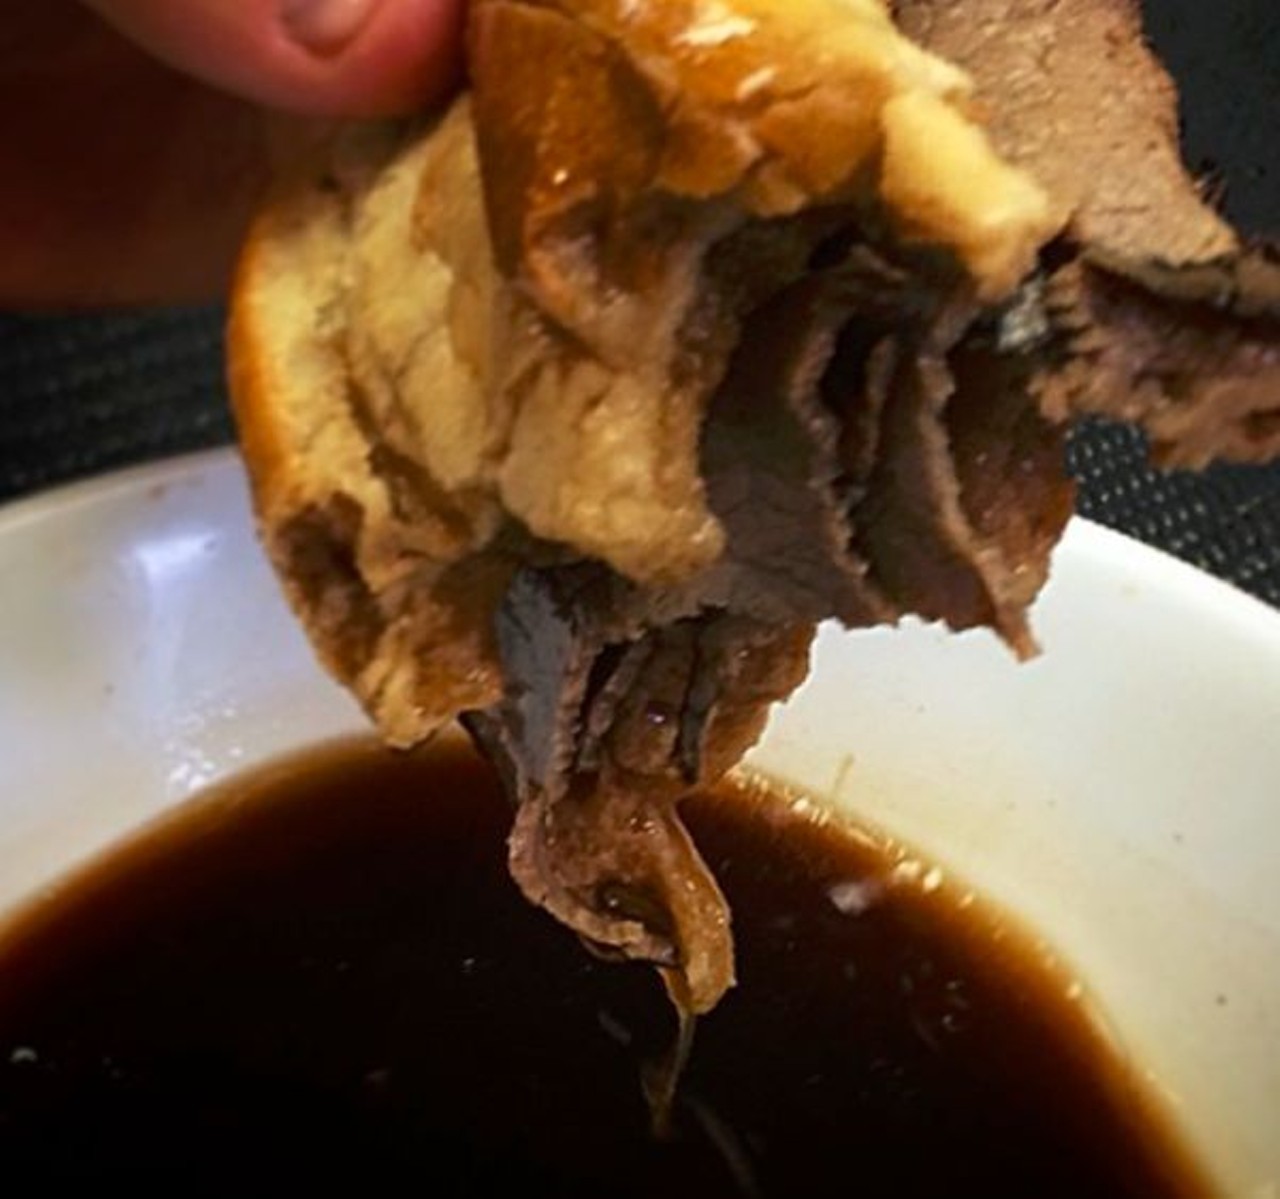  French Dip from Rosewood Grill
Multiple Locations
A crusty French roll is stuffed with shaved Certified Angus Beef prime rib and gruyere cheese. But it&#146;s that salty, beefy au jus on the side that transforms this sandwich into the stuff of legends.
Photo via @Rosewood_Grill/Instagram